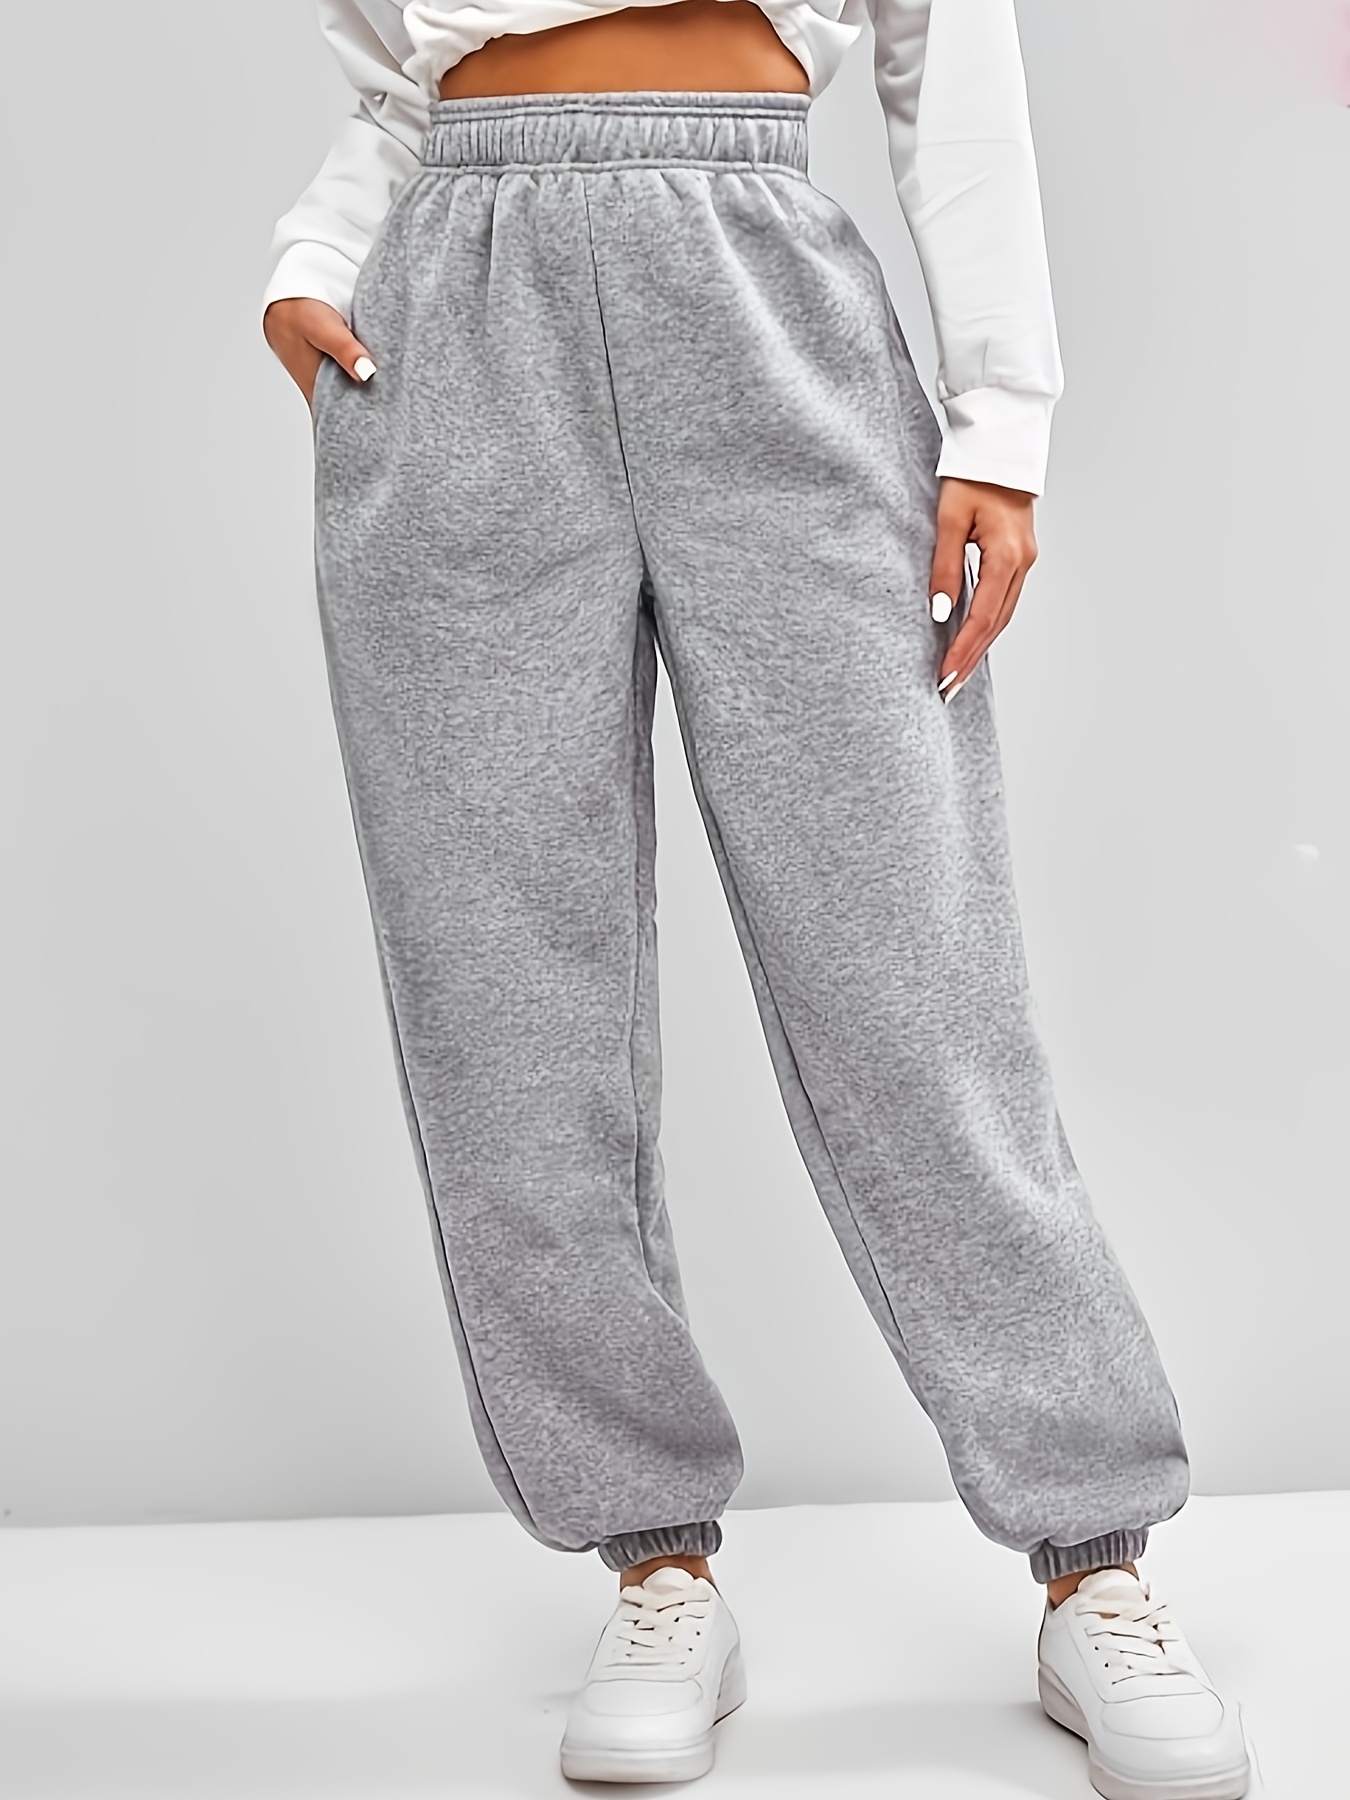 Women's Sweatpants Baggy Jogger Pants Cute High Waisted Wide Leg Sweatpant  with Pockets